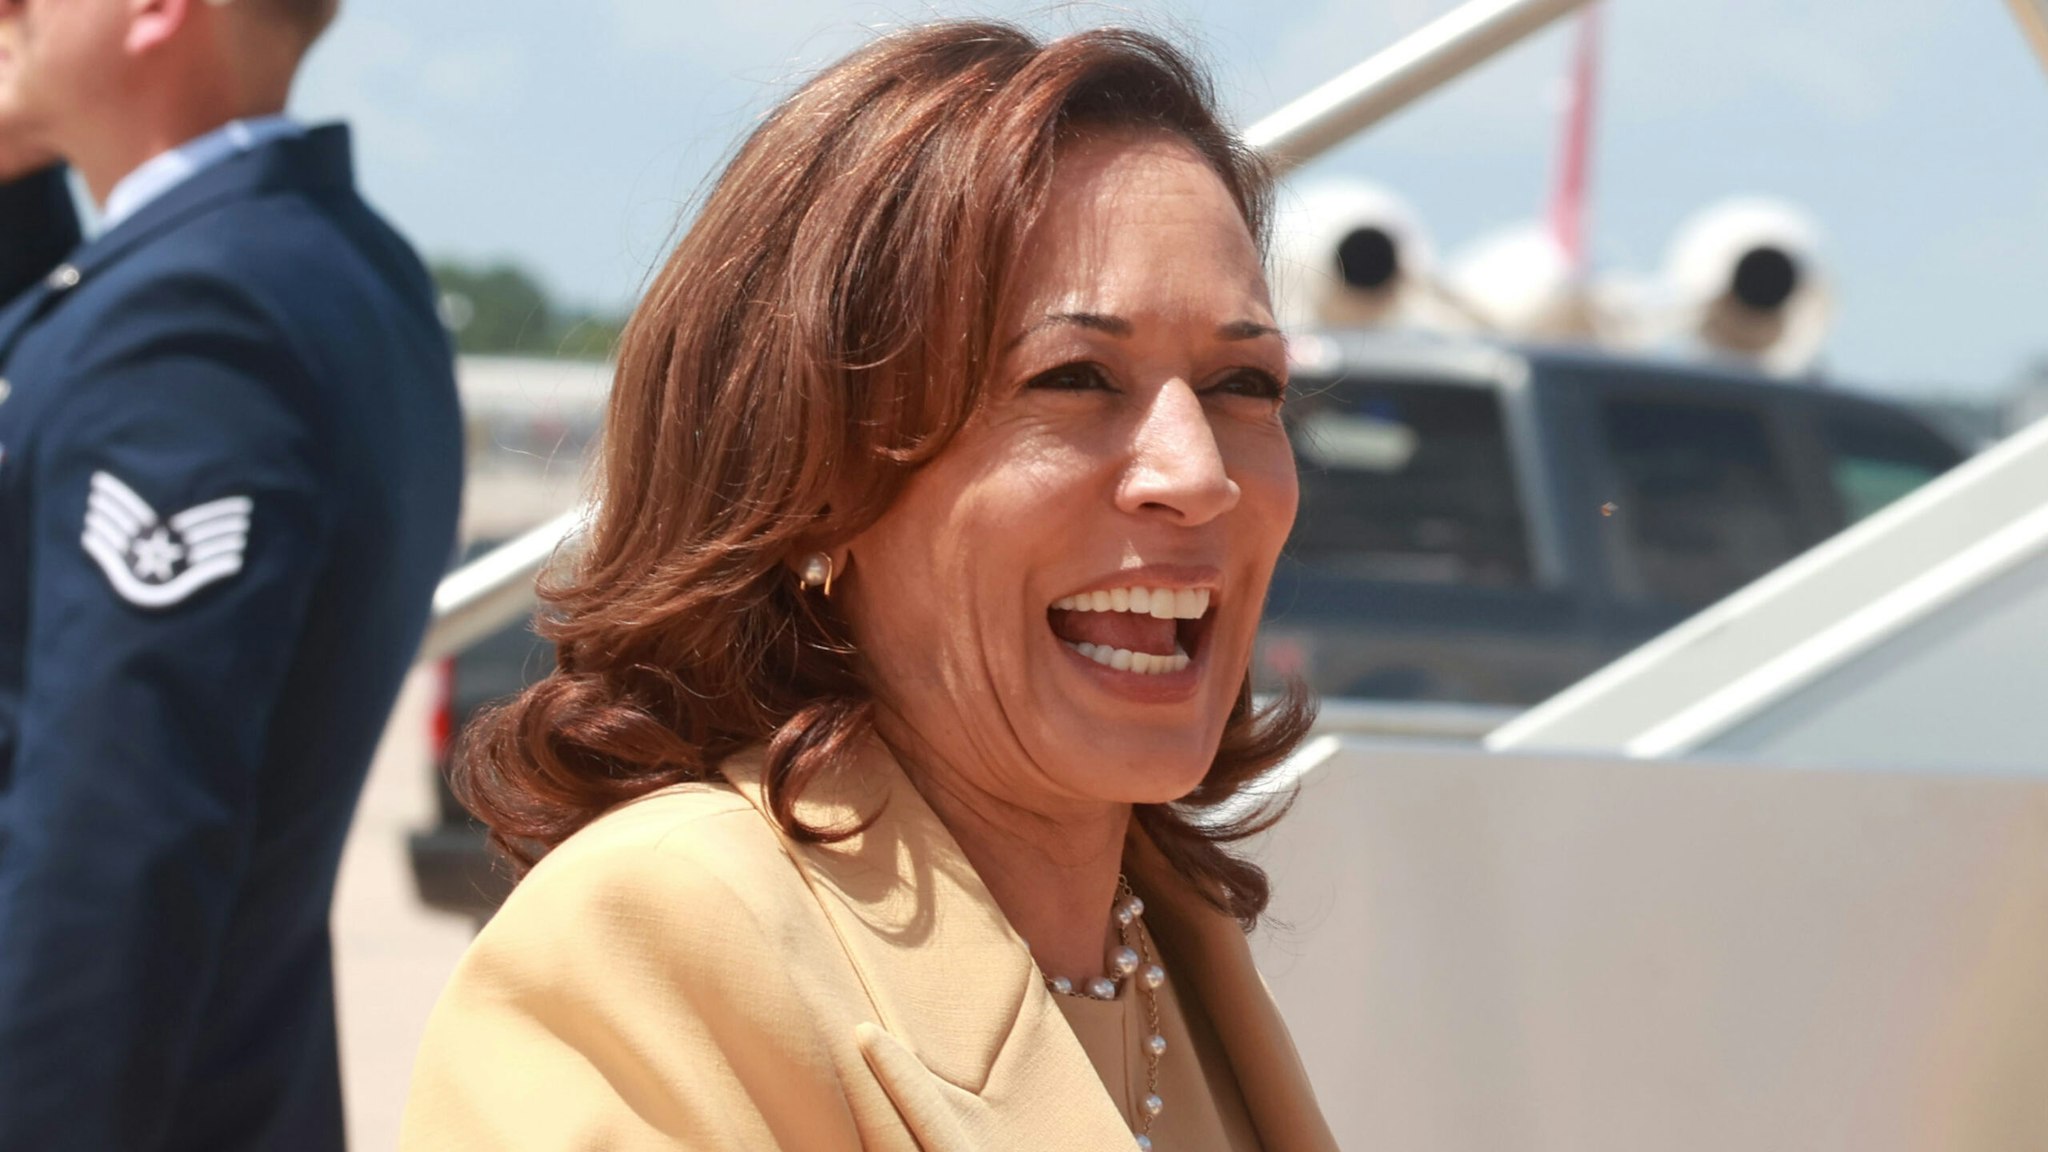 Vice President Kamala Harris prepares to board Air Force Two at Orlando International Airport after delivering remarks at the 20th Quadrennial Convention of the Women&apos;s Missionary Society of the African Methodist Episcopal (AME) Church, Tuesday, Aug. 1, 2023. The gathering at the Orange County Convention Center in Orlando is hosting 3,000 delegates from 39 countries.